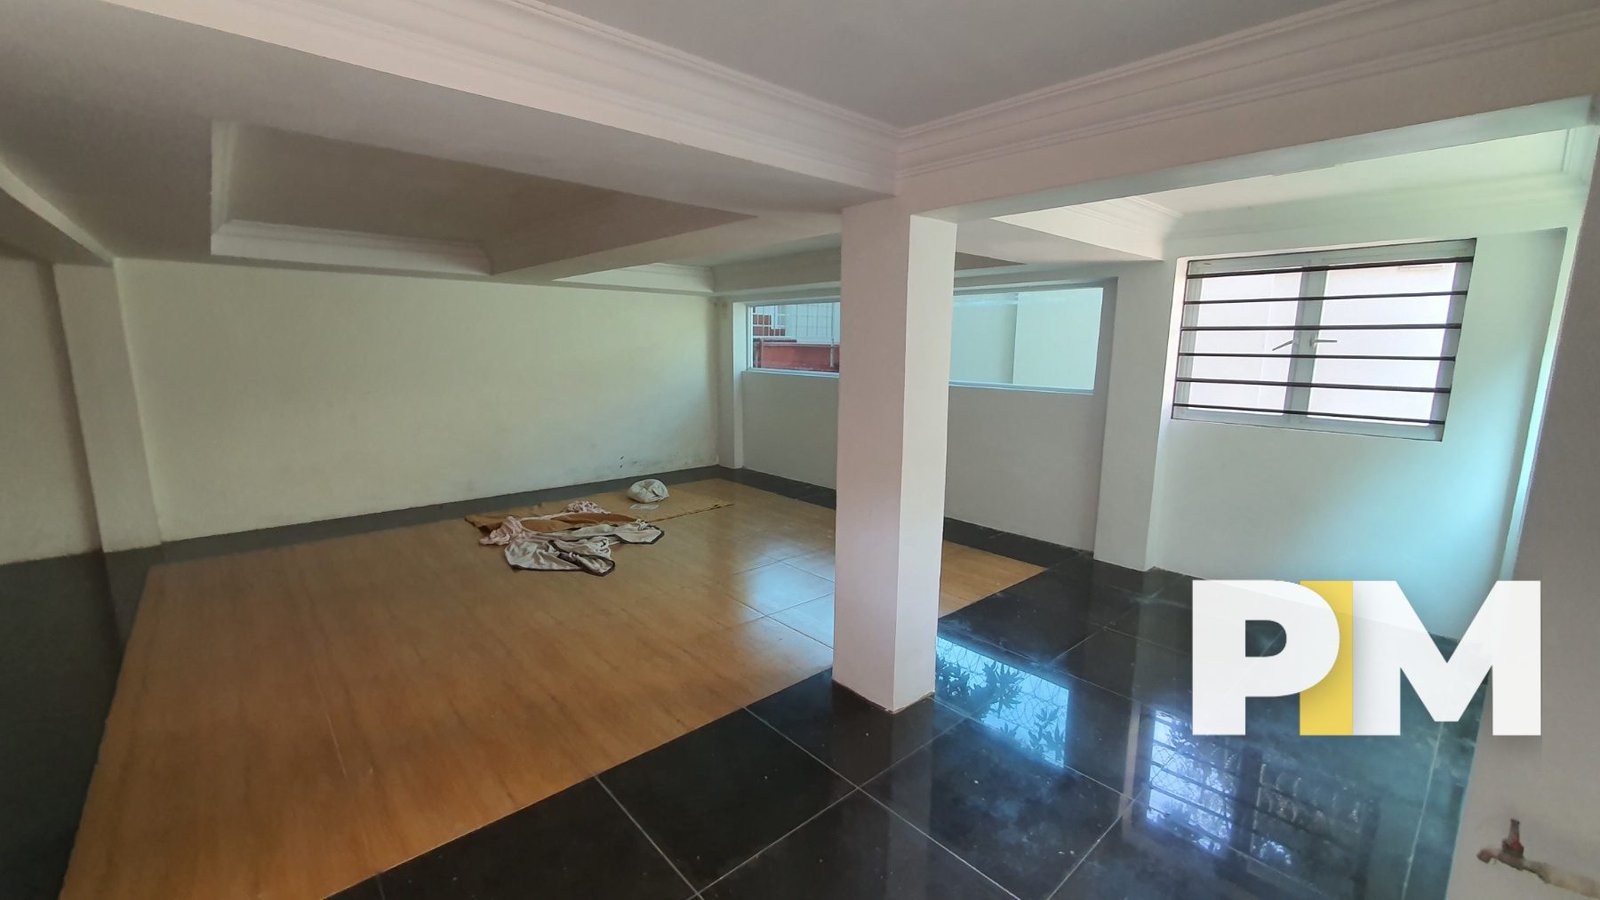 Open space with natural light - Real Estate in Yangon (2)